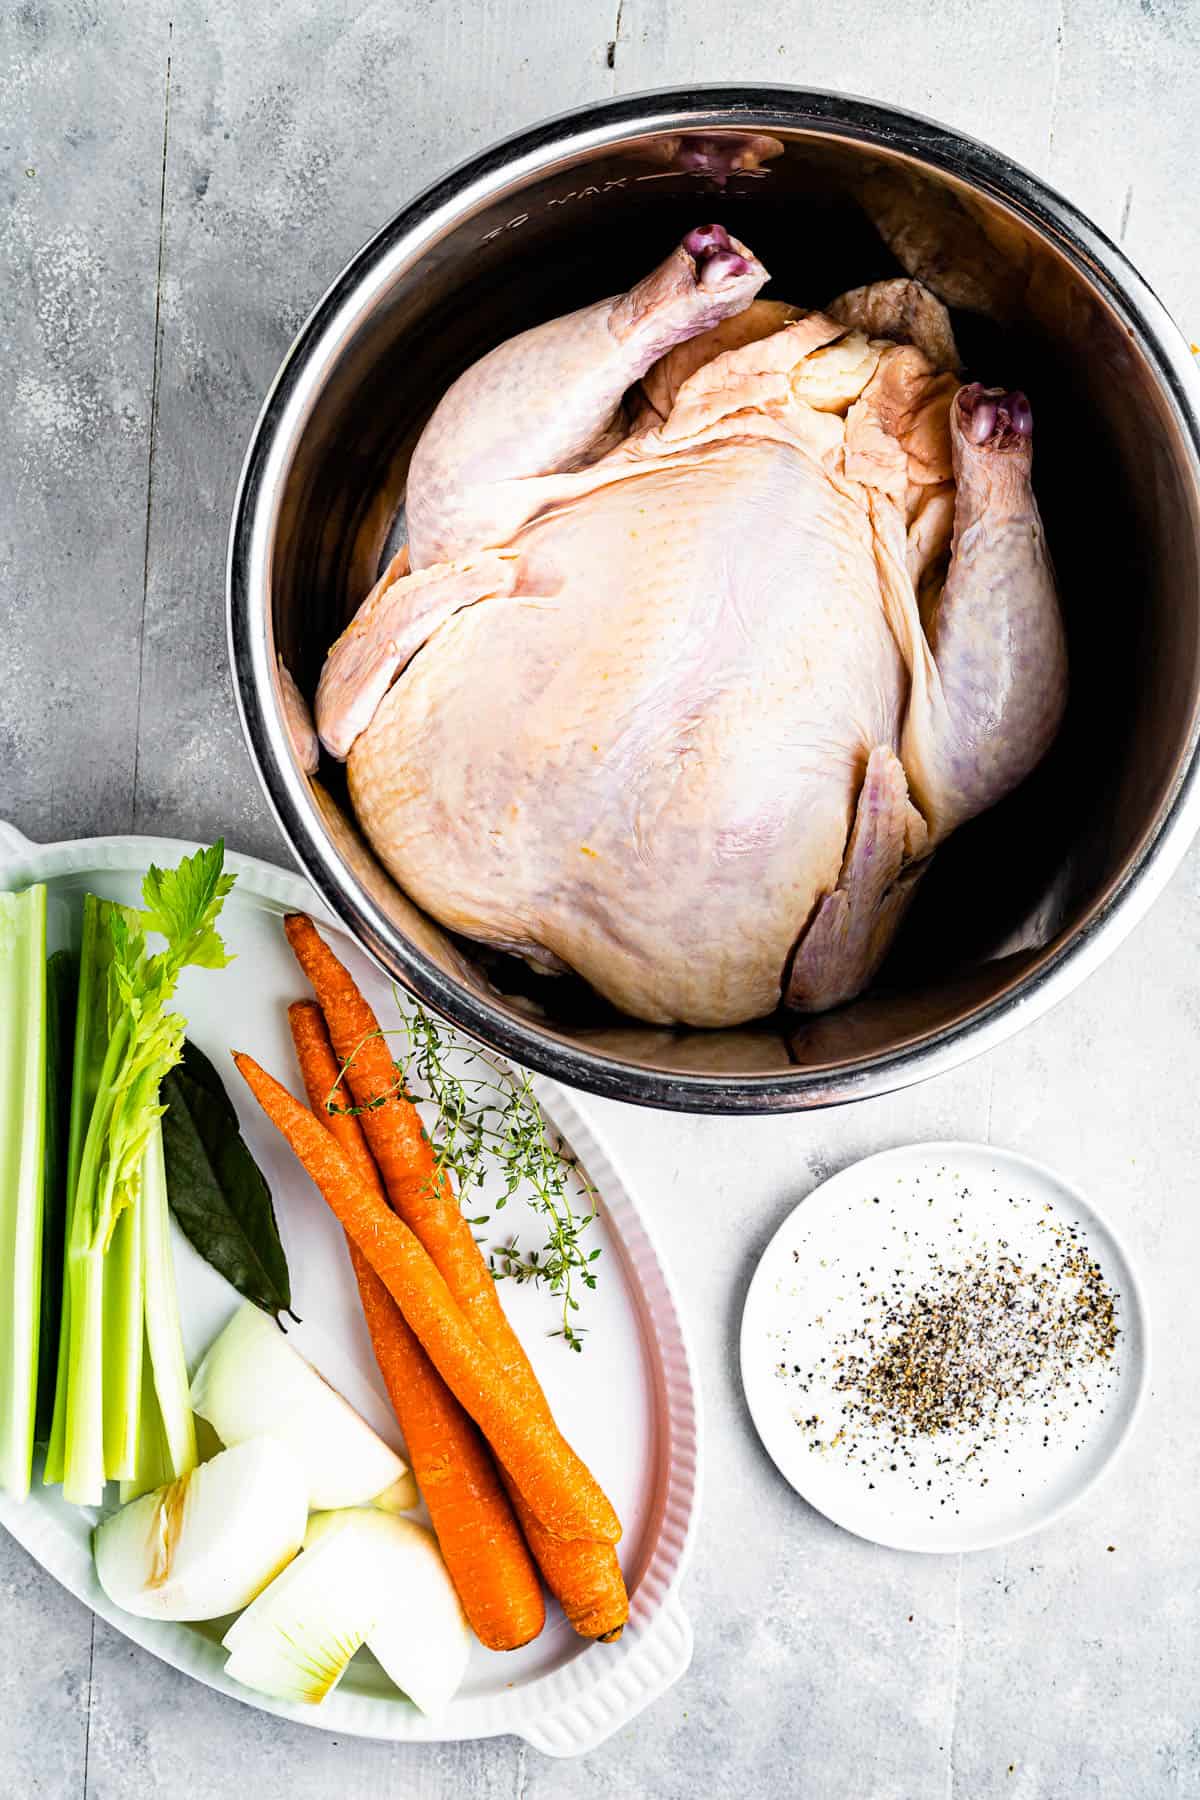 Clockwise from top: a whole chicken in a pot, seasonings, and a tray of raw vegetables including carrots, onions, and celery.